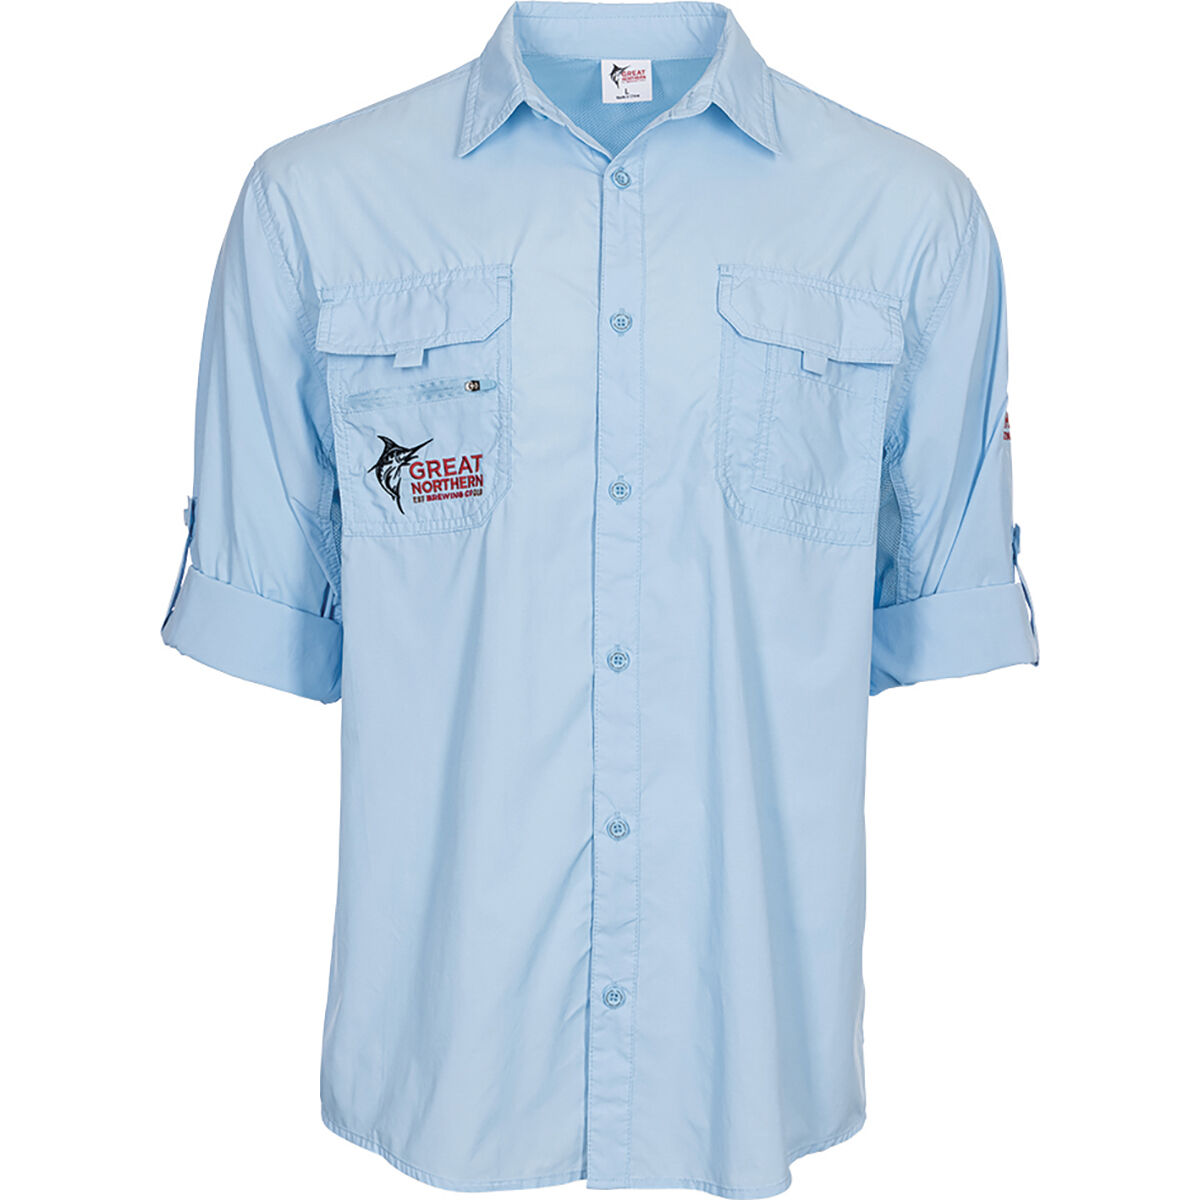 The Great Northern Brewing Co. Men's Long Sleeved Fishing Shirt Blue XL